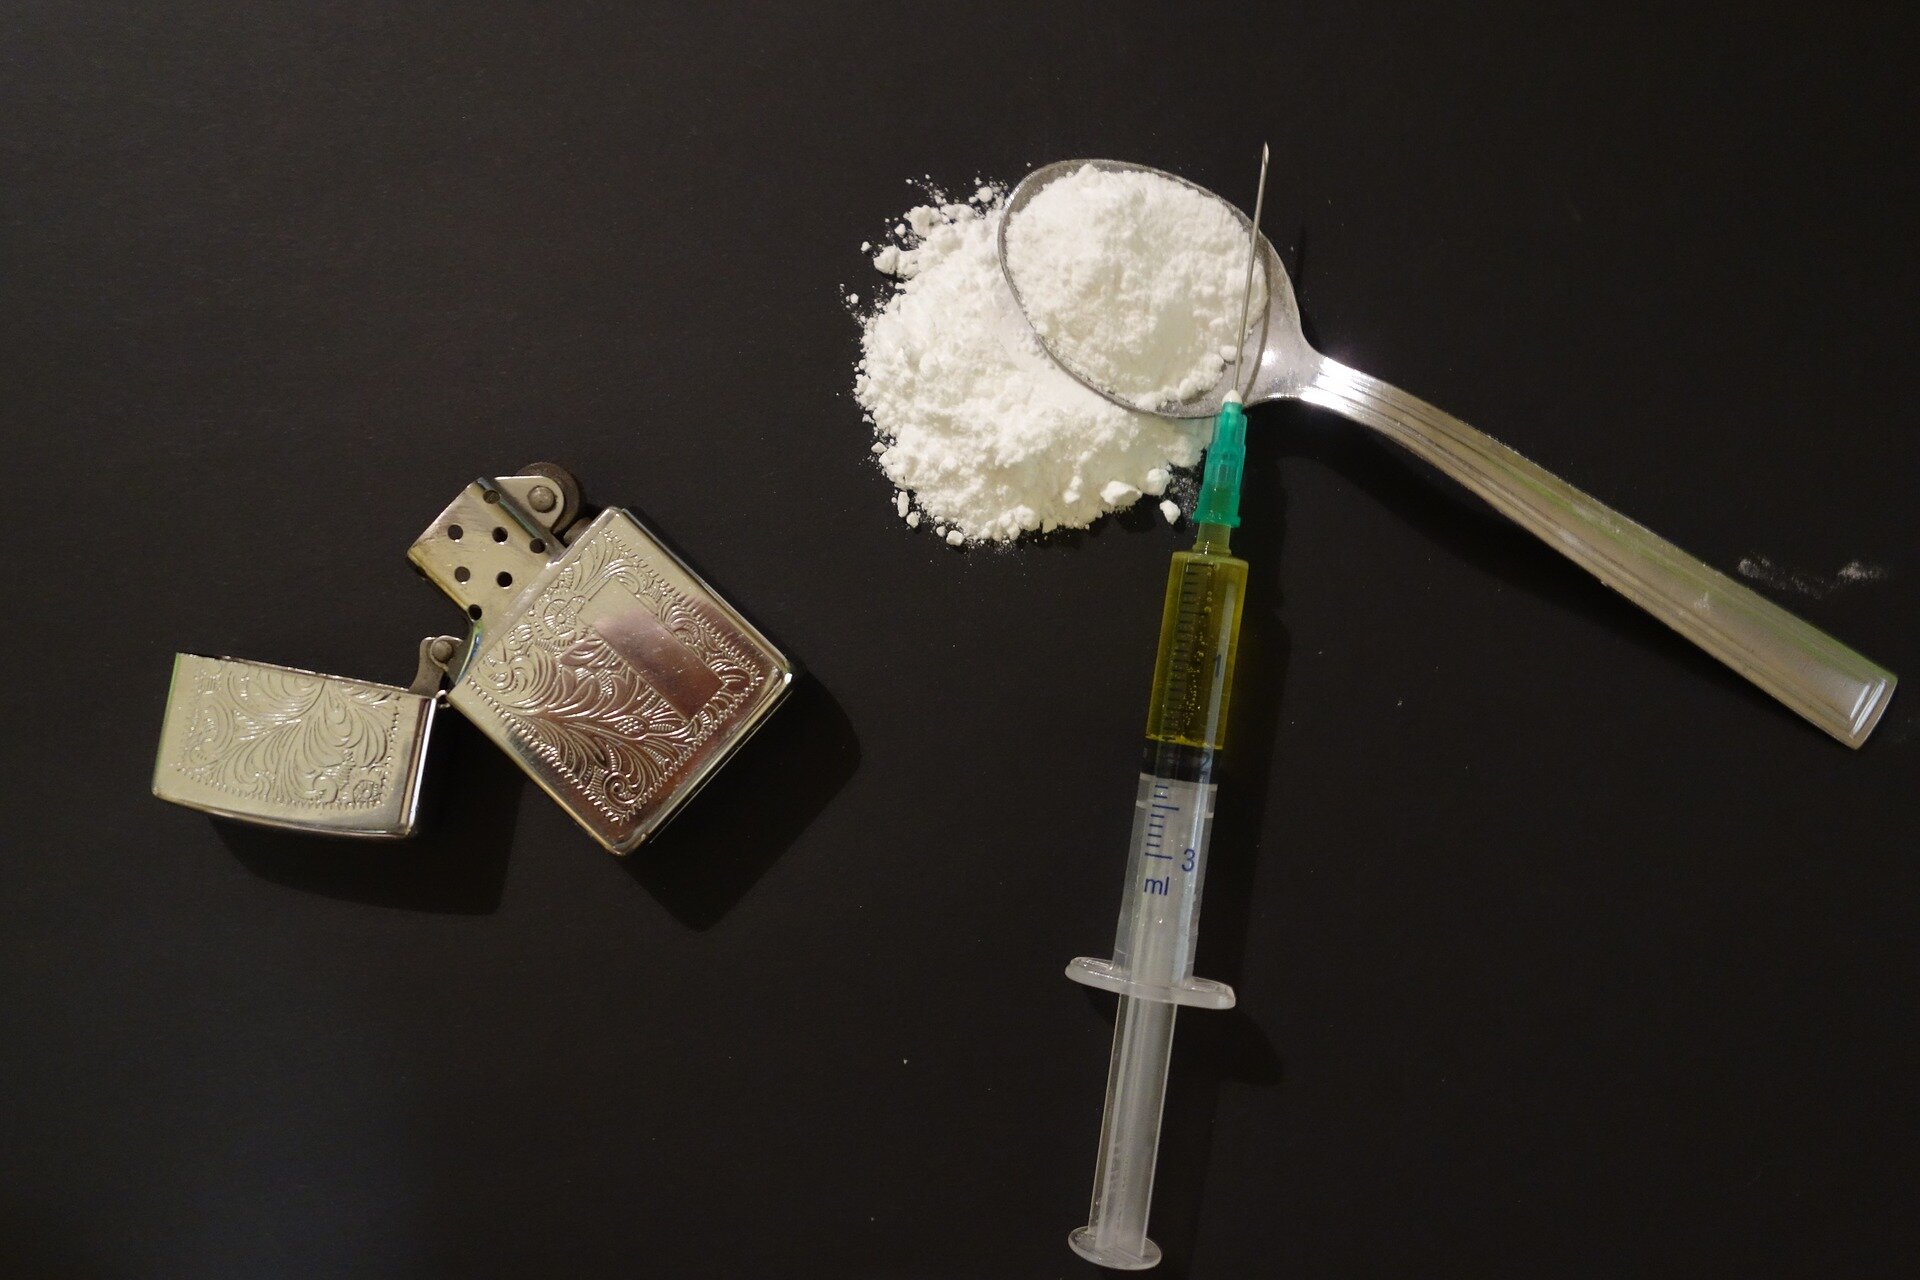 New Research Shows More People Knowingly Use Fentanyl